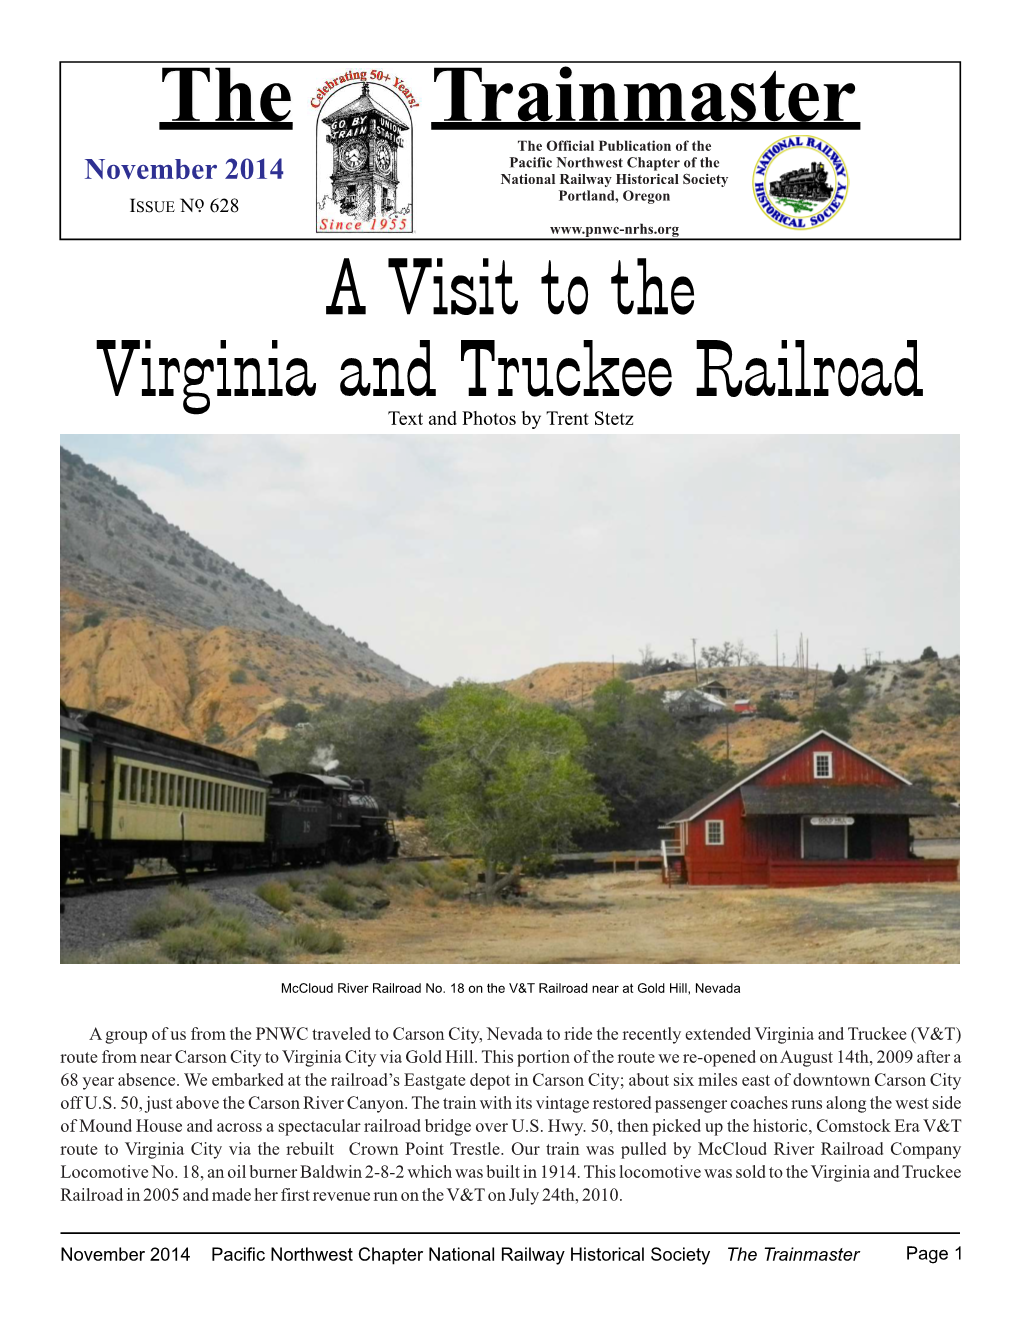 The Trainmaster a Visit to the Virginia and Truckee Railroad